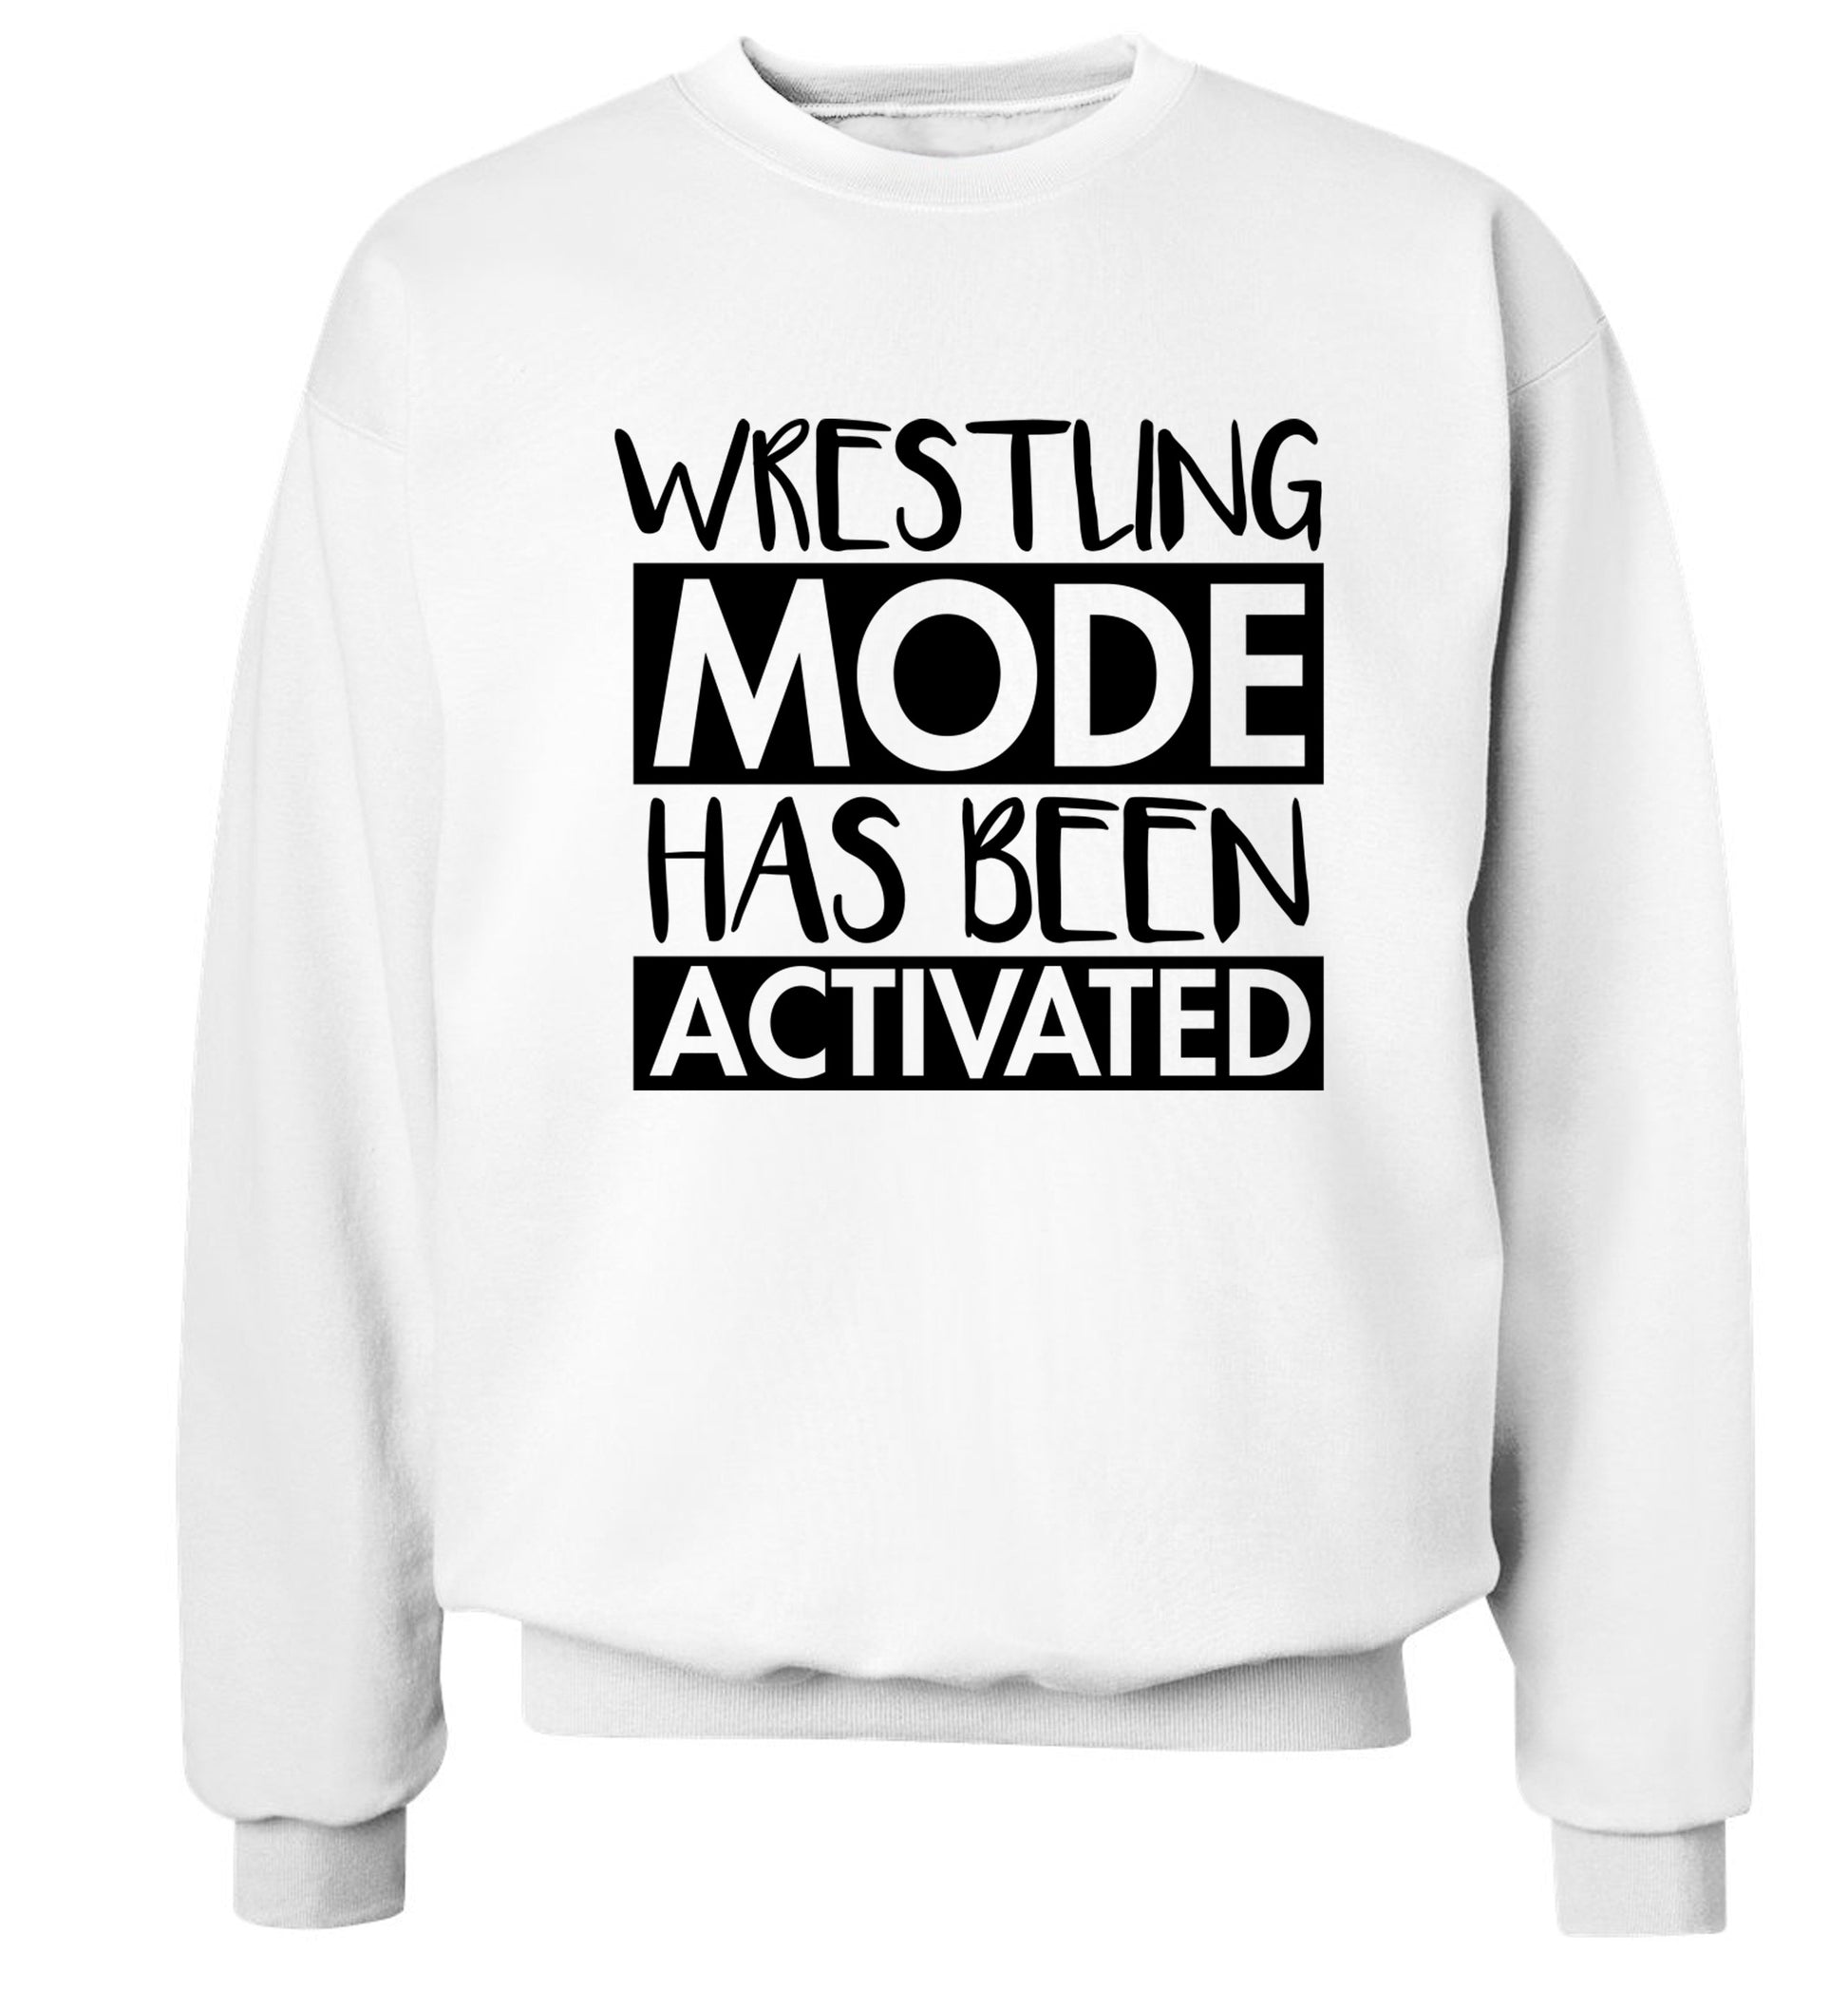 Wresting mode activated Adult's unisex white Sweater 2XL